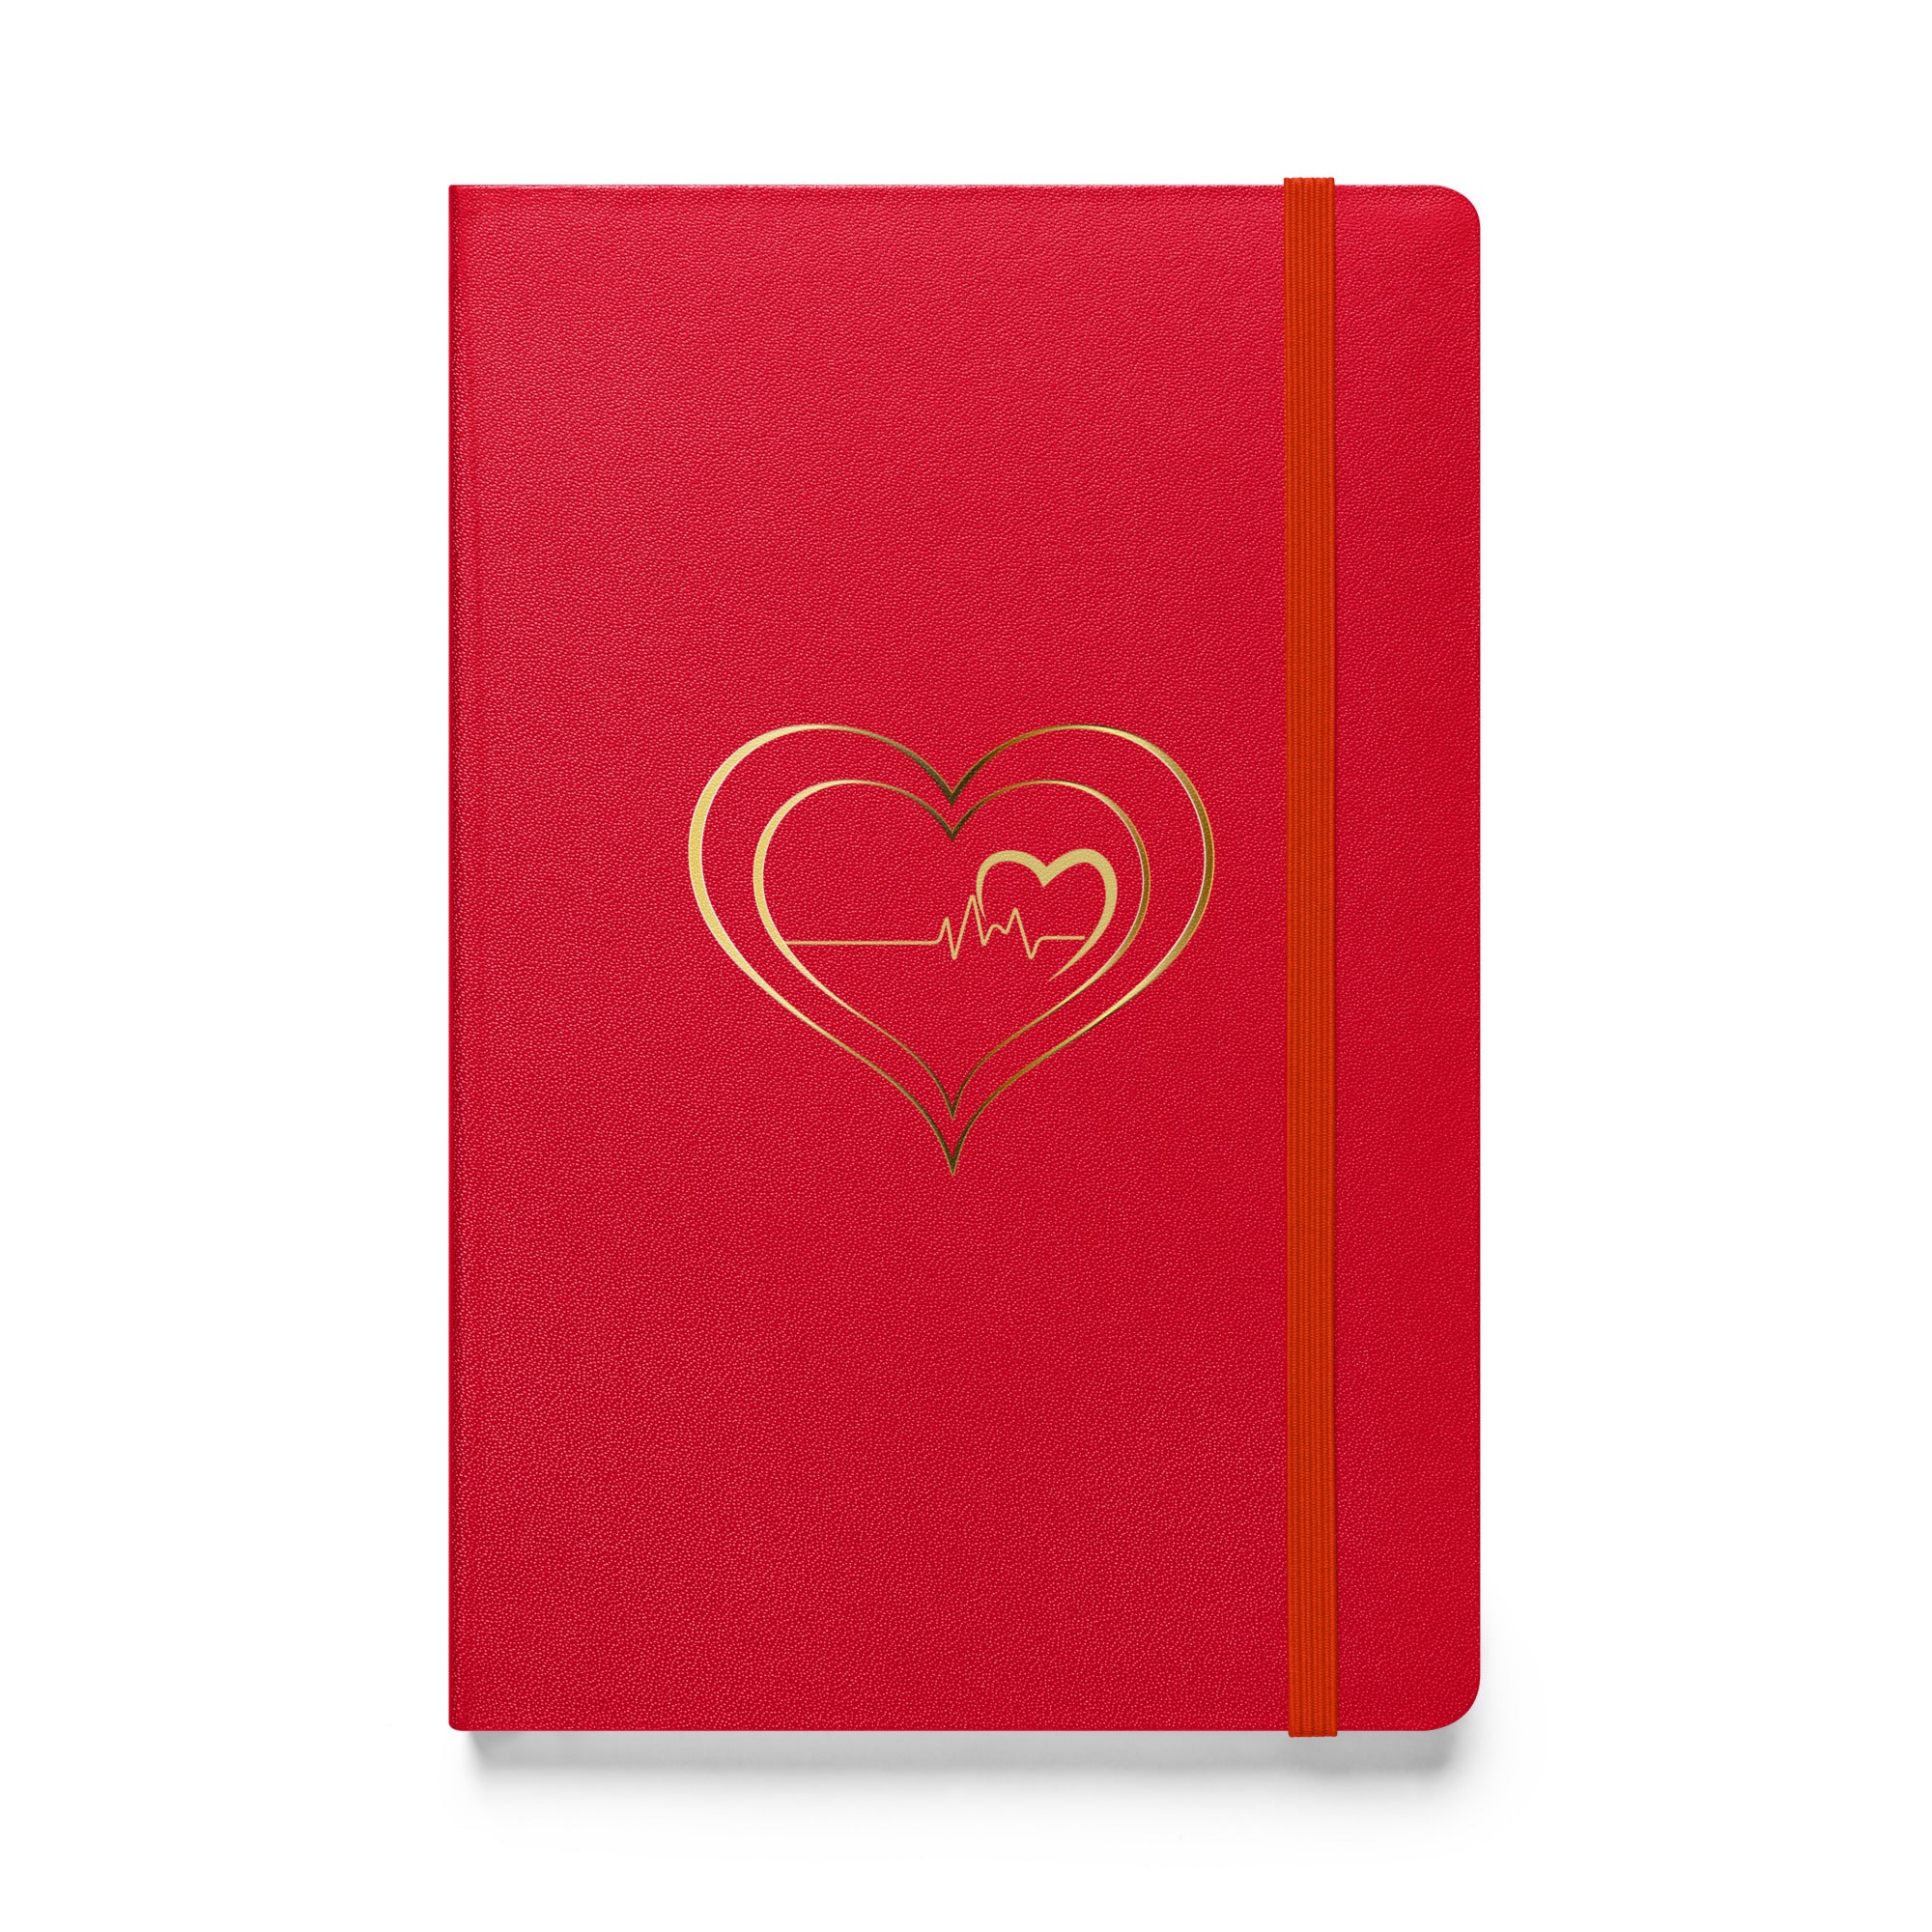 Beating Heart Hardcover bound notebook